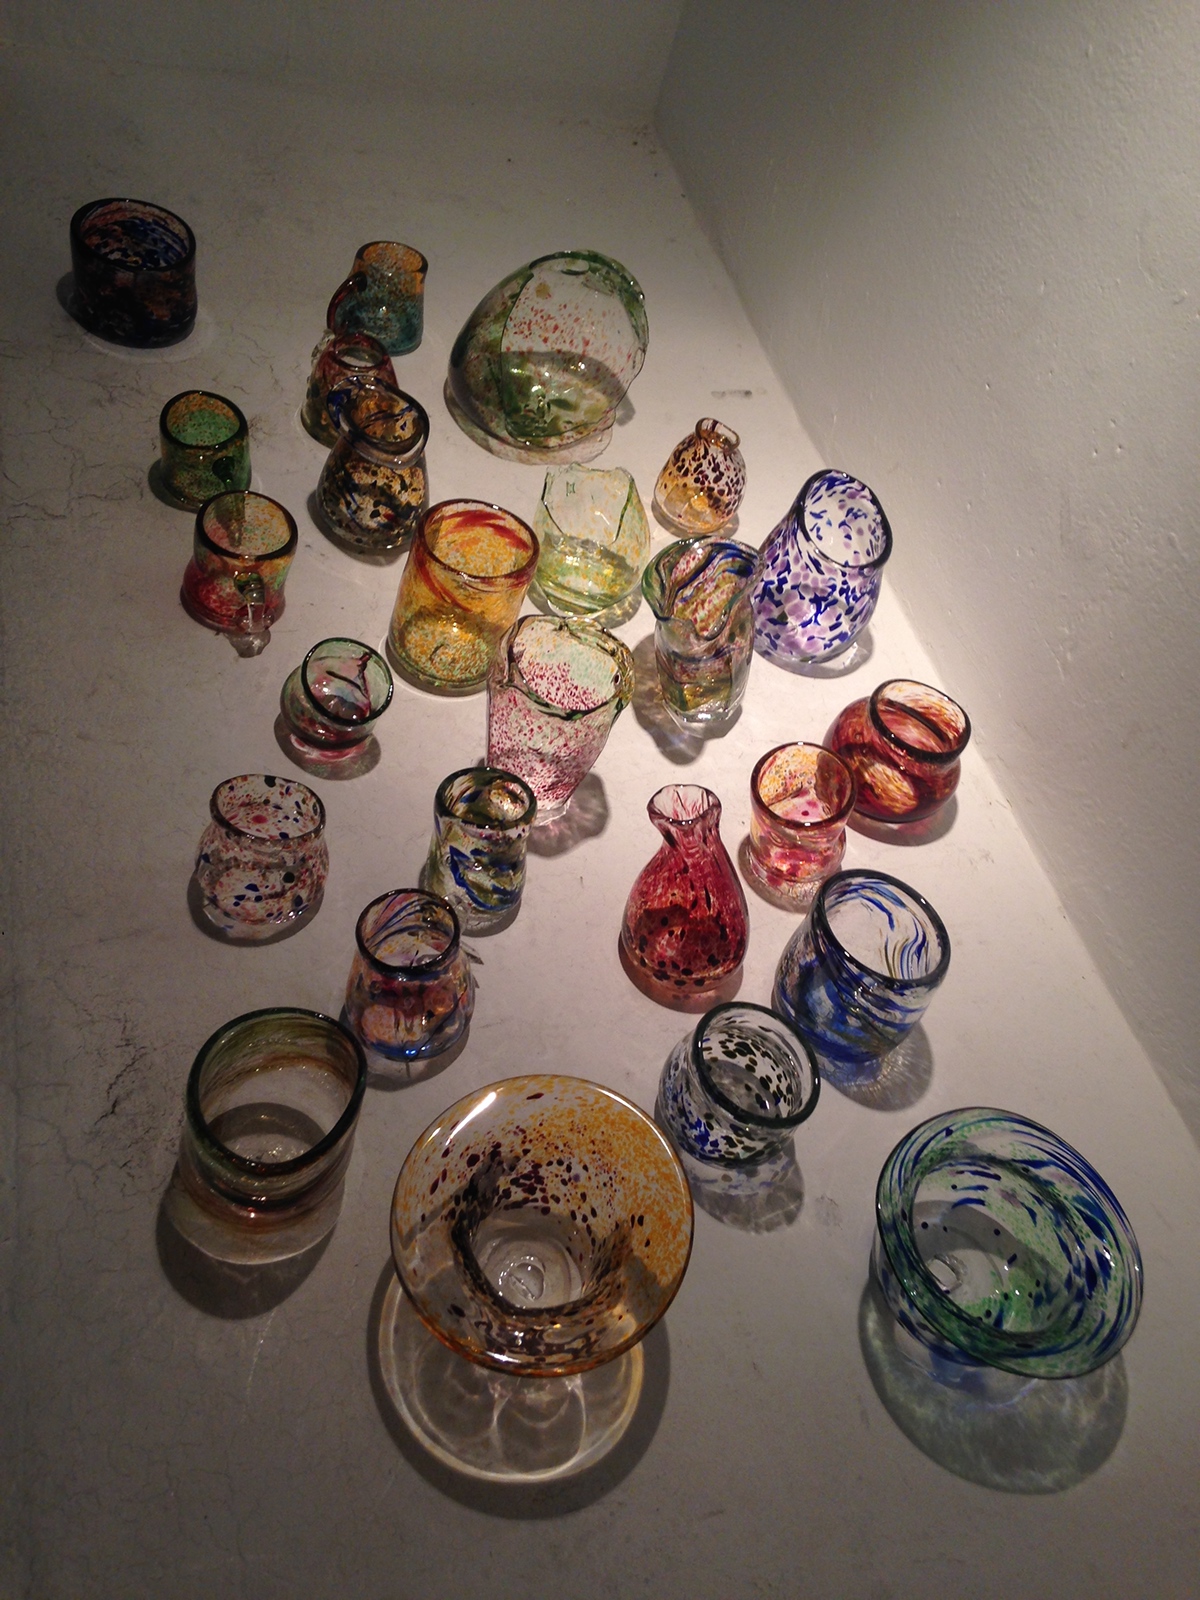 color glass blownglass glassblowing Hot colorful craft organic Nature Transparency light tableware design risd pattern